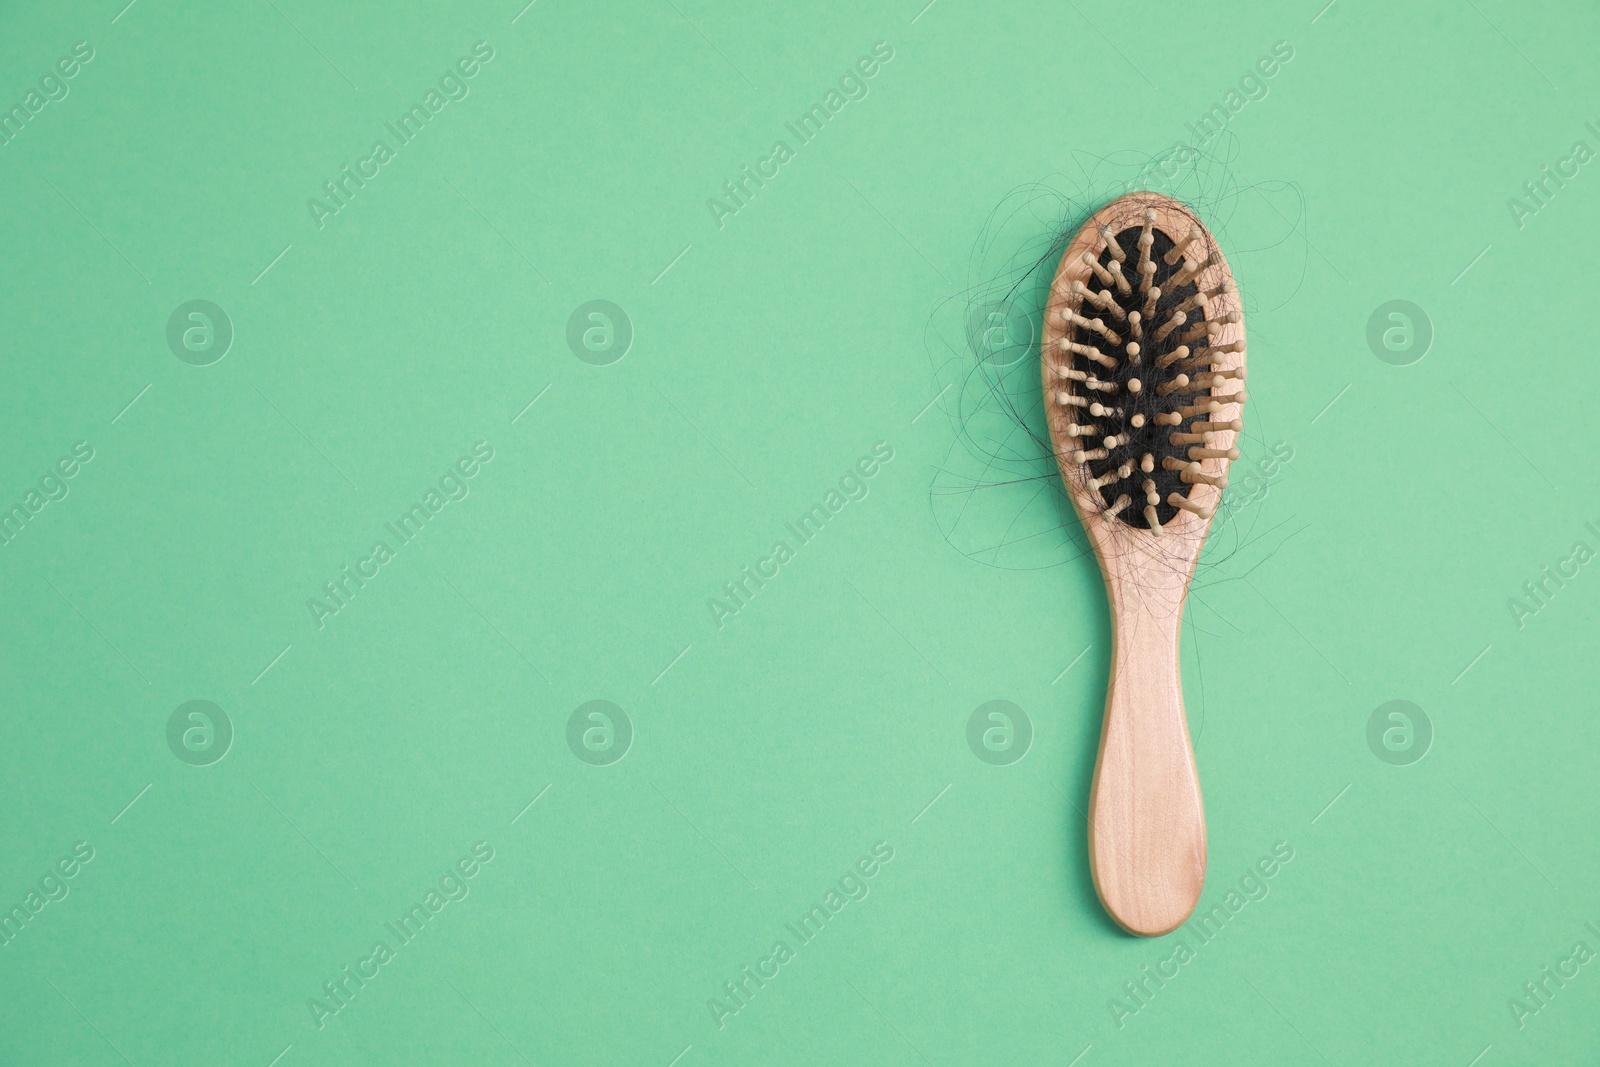 Photo of Wooden brush with lost hair on green background, top view. Space for text